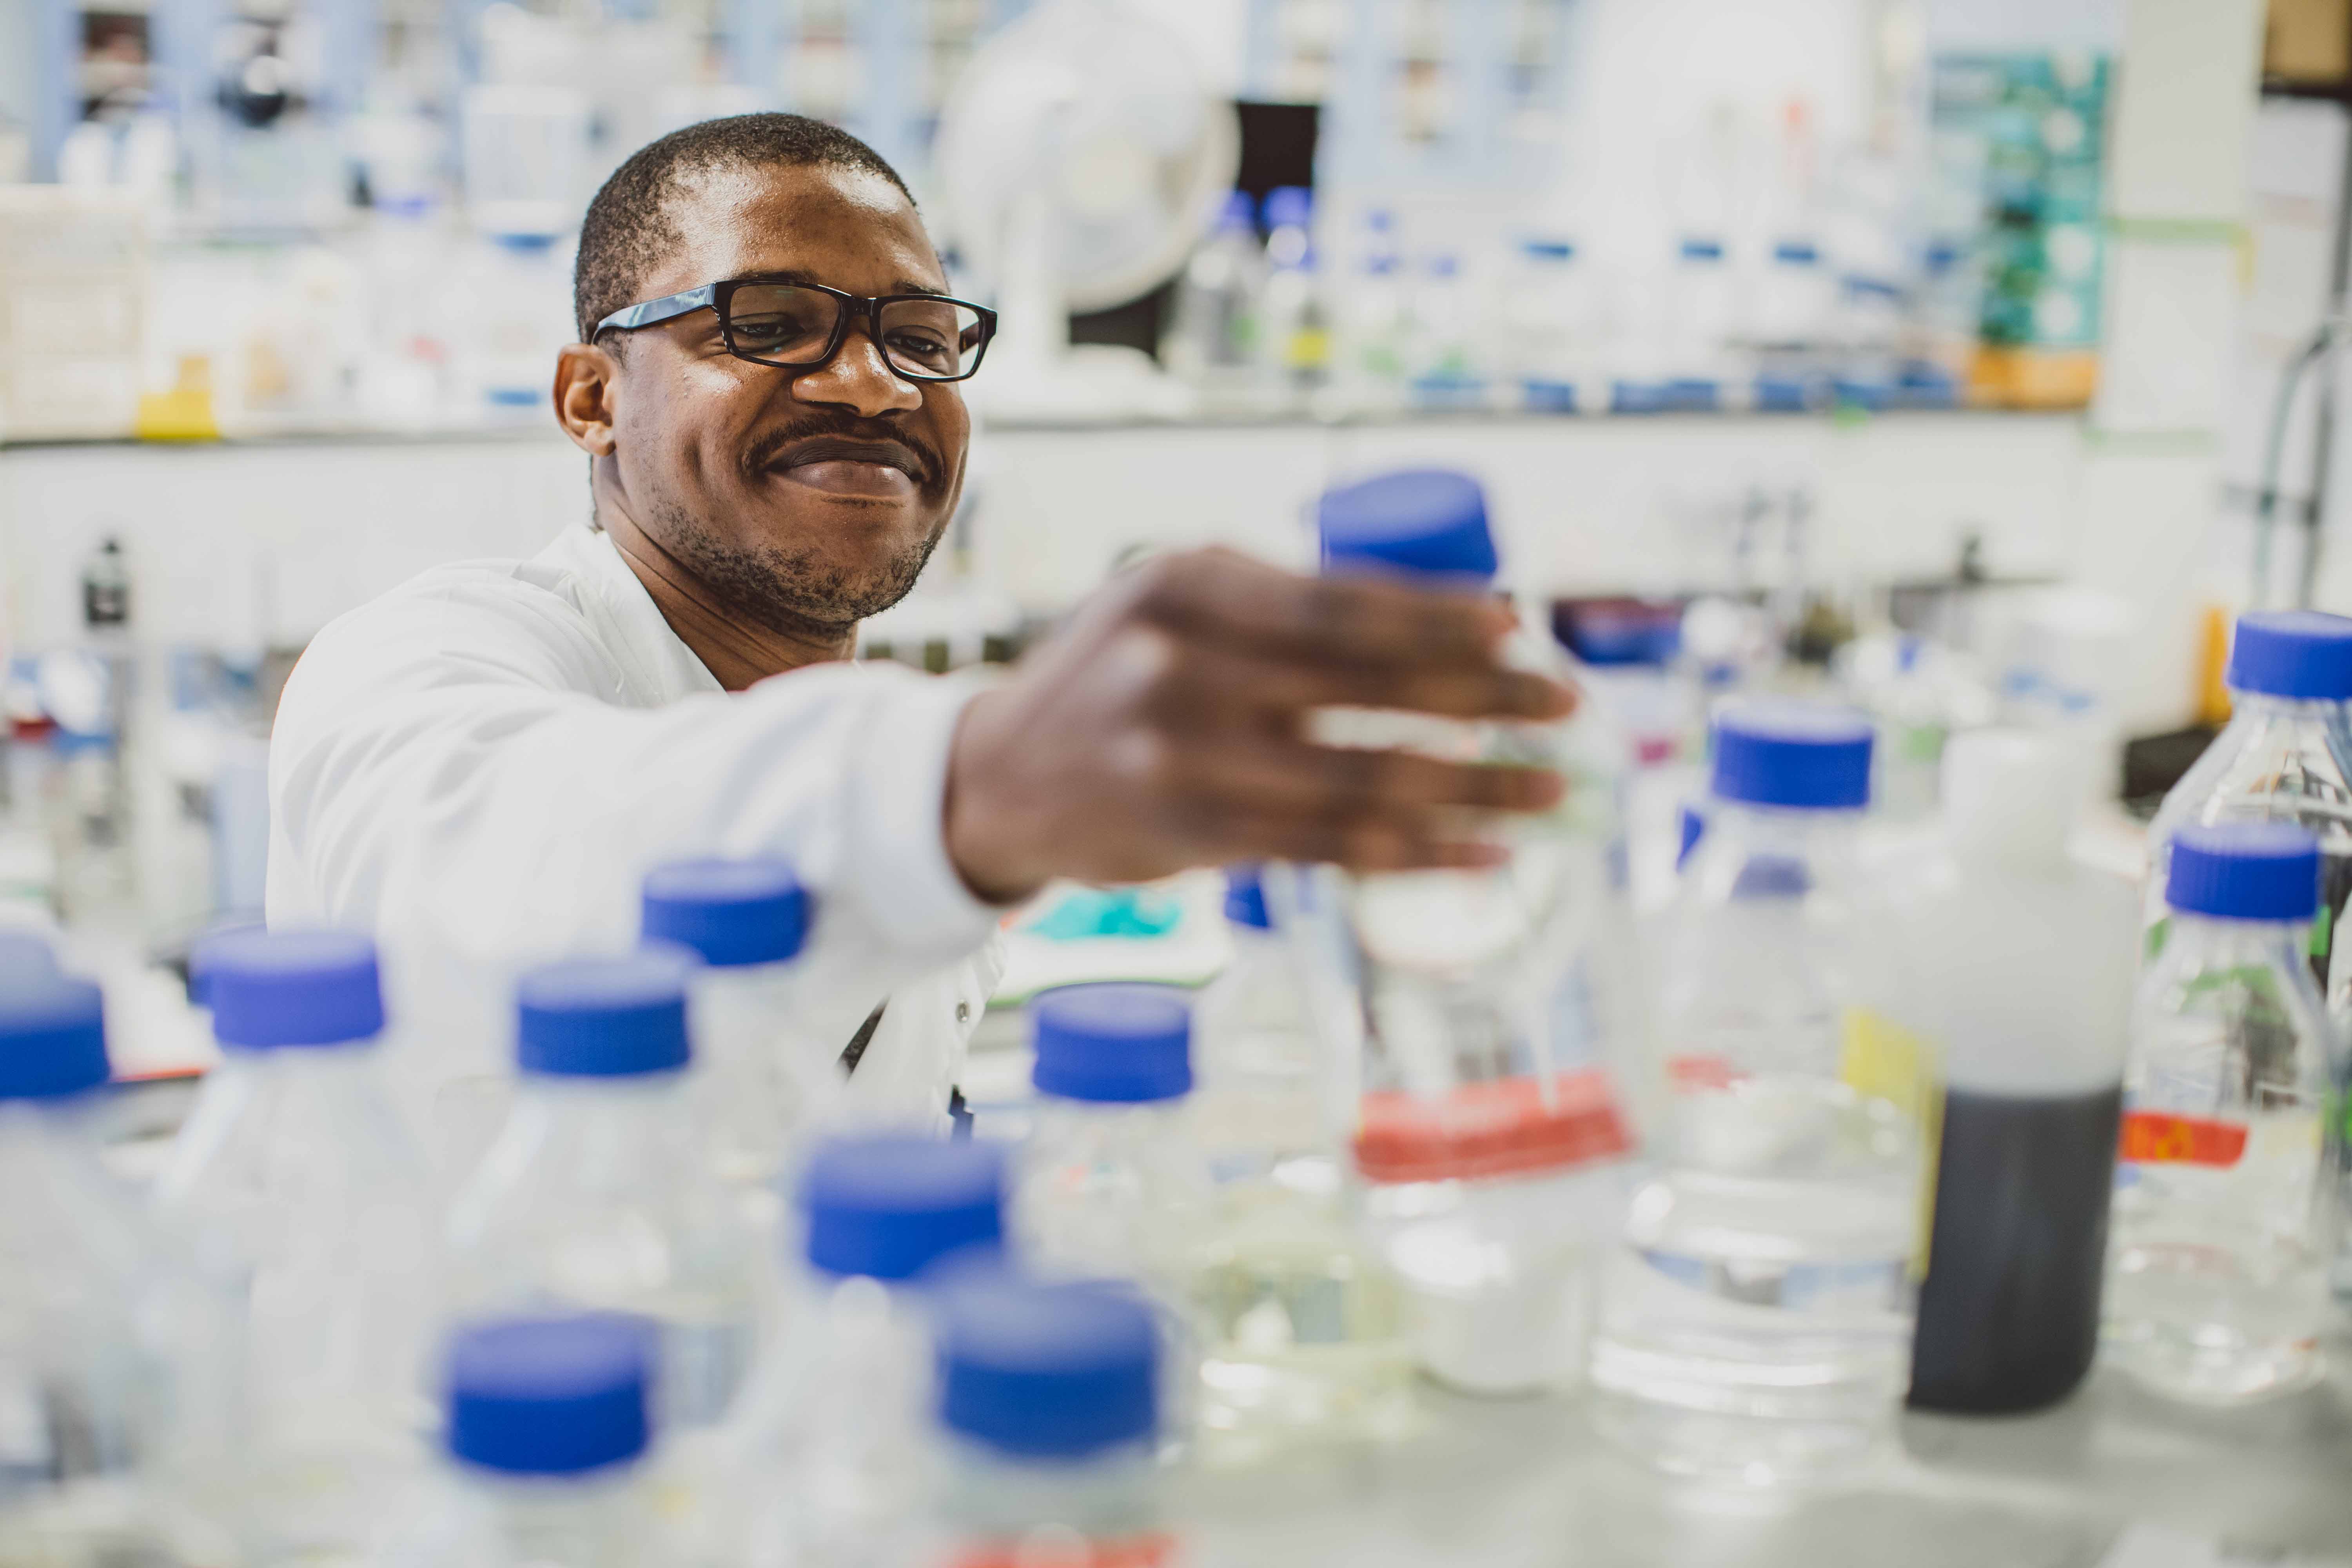 A male scientist in a lab, reaching for a bottle in the foreground